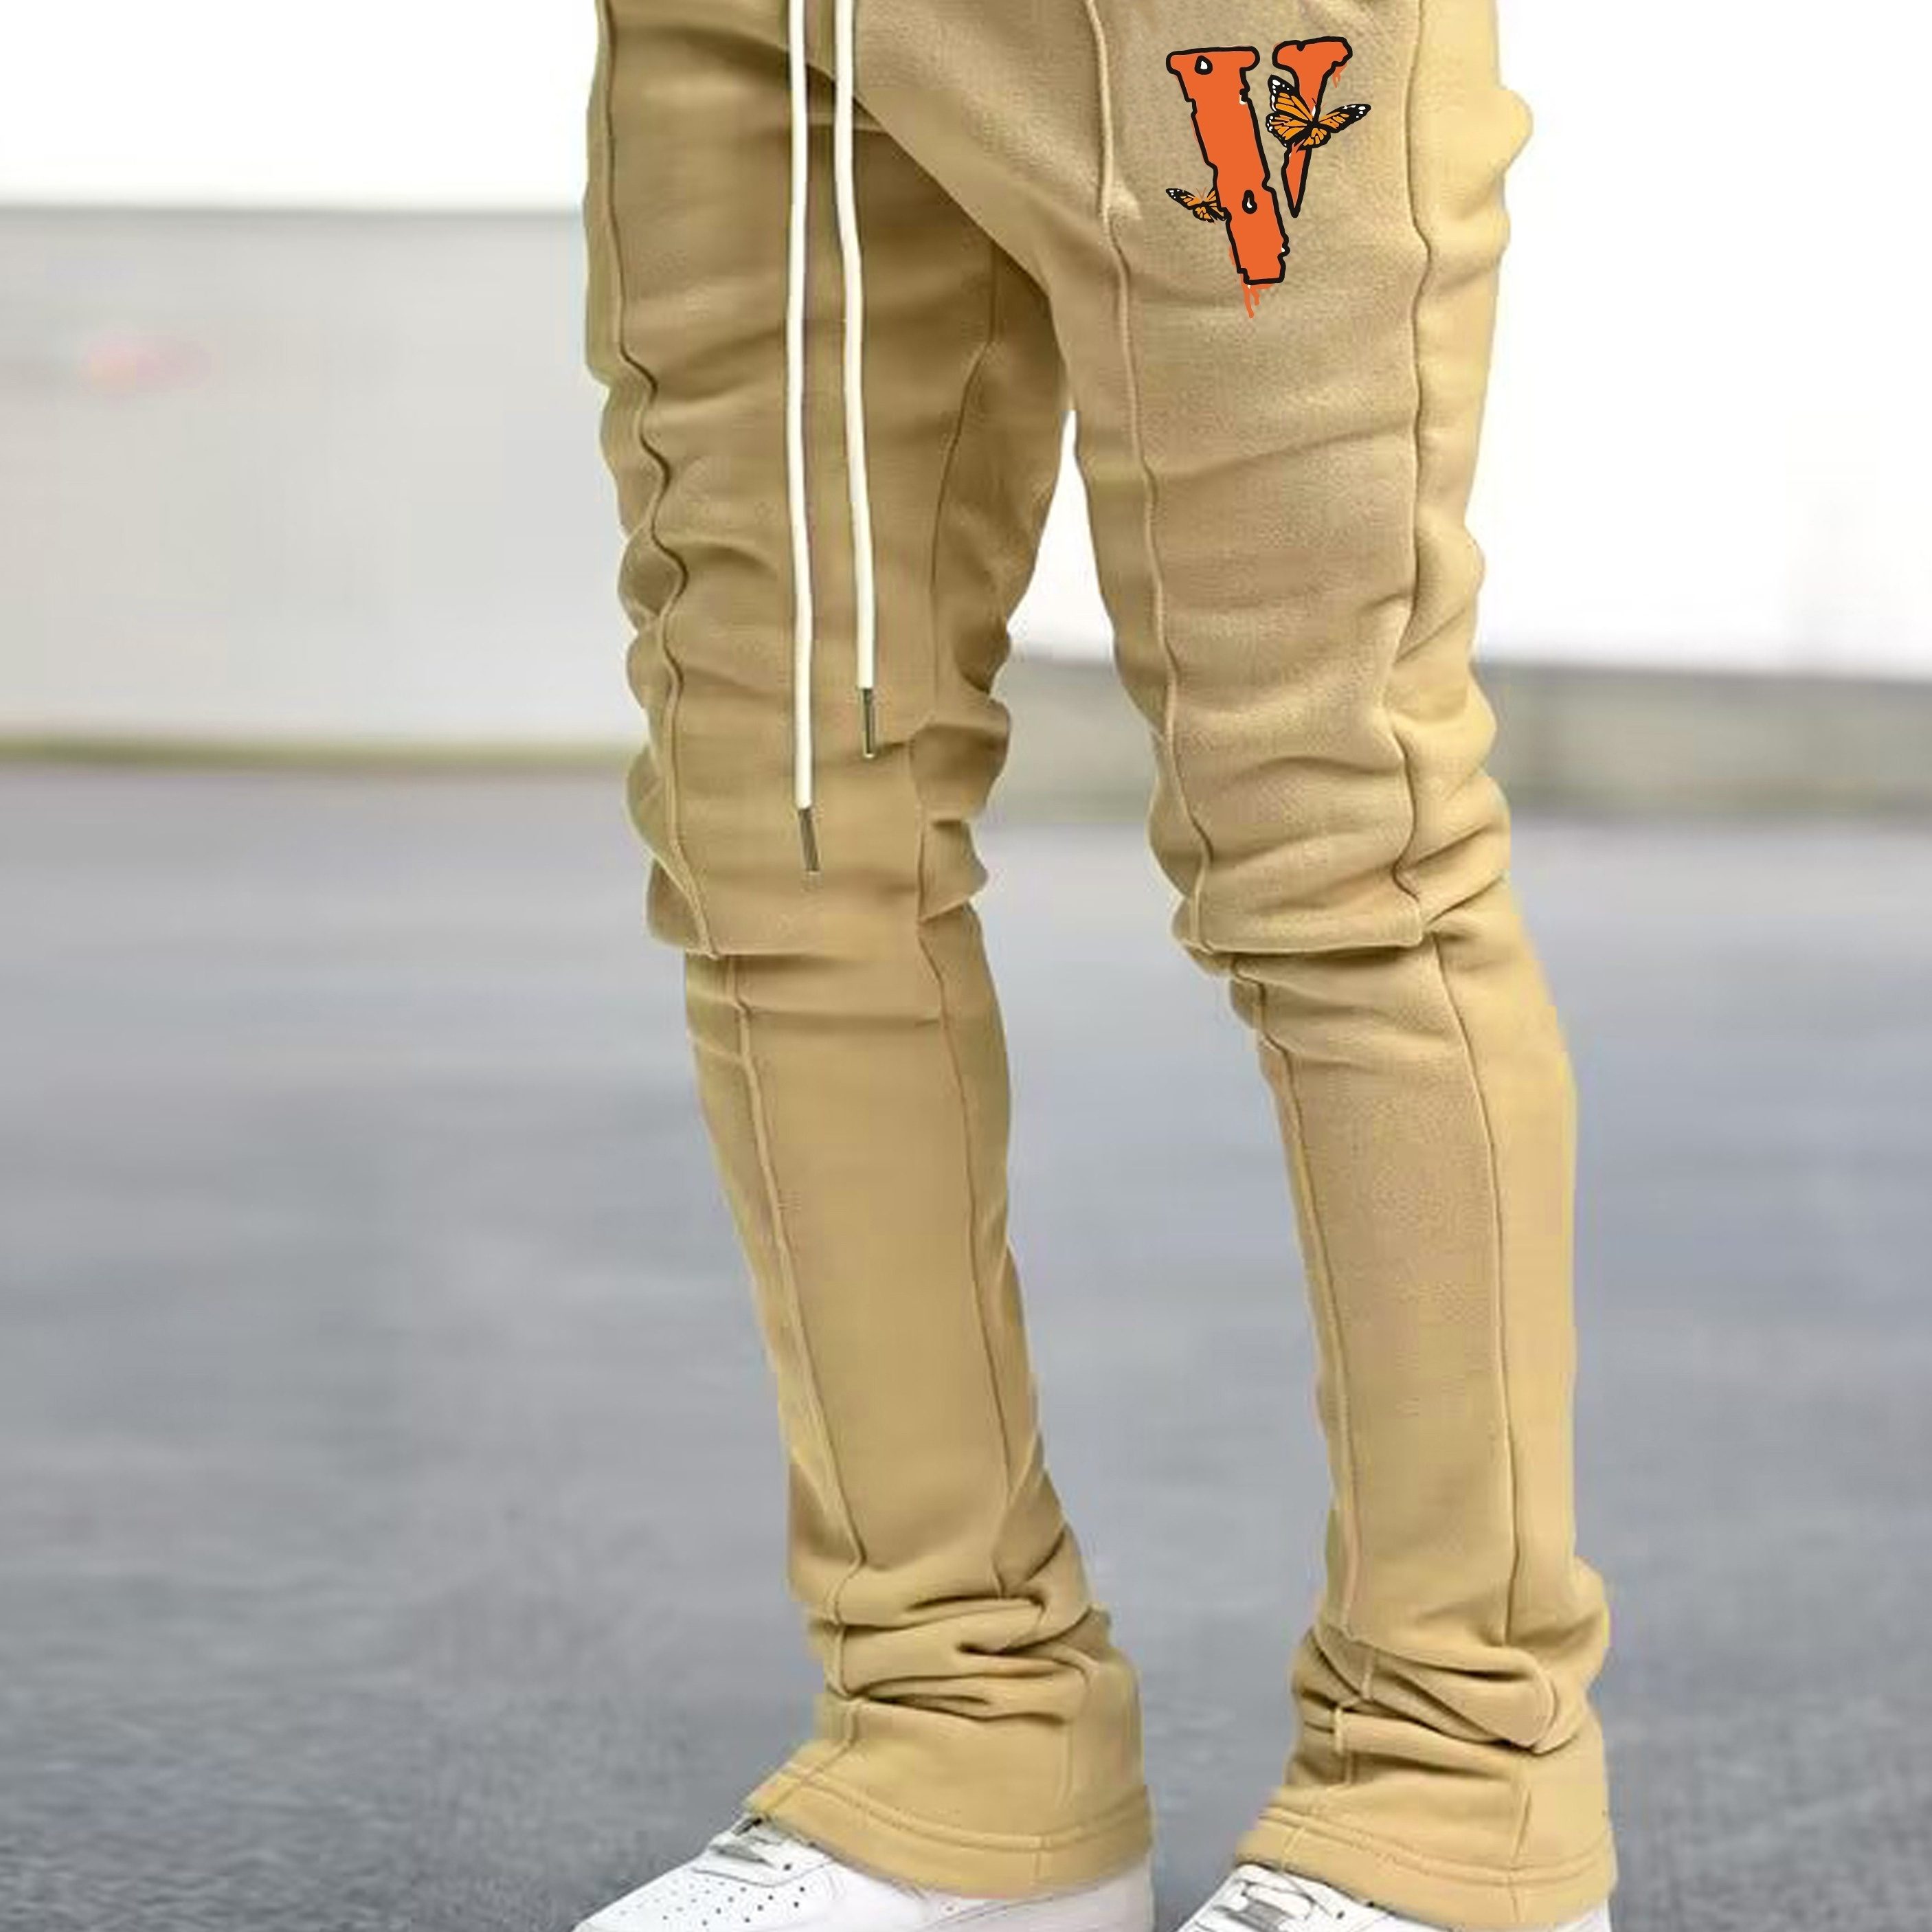 

Men's Casual Sweatpants "v" Butterfly Graphic Pocket Elastic Waist Drawstring Flared Pants Hip-hop Trousers Spring Summer Clothes